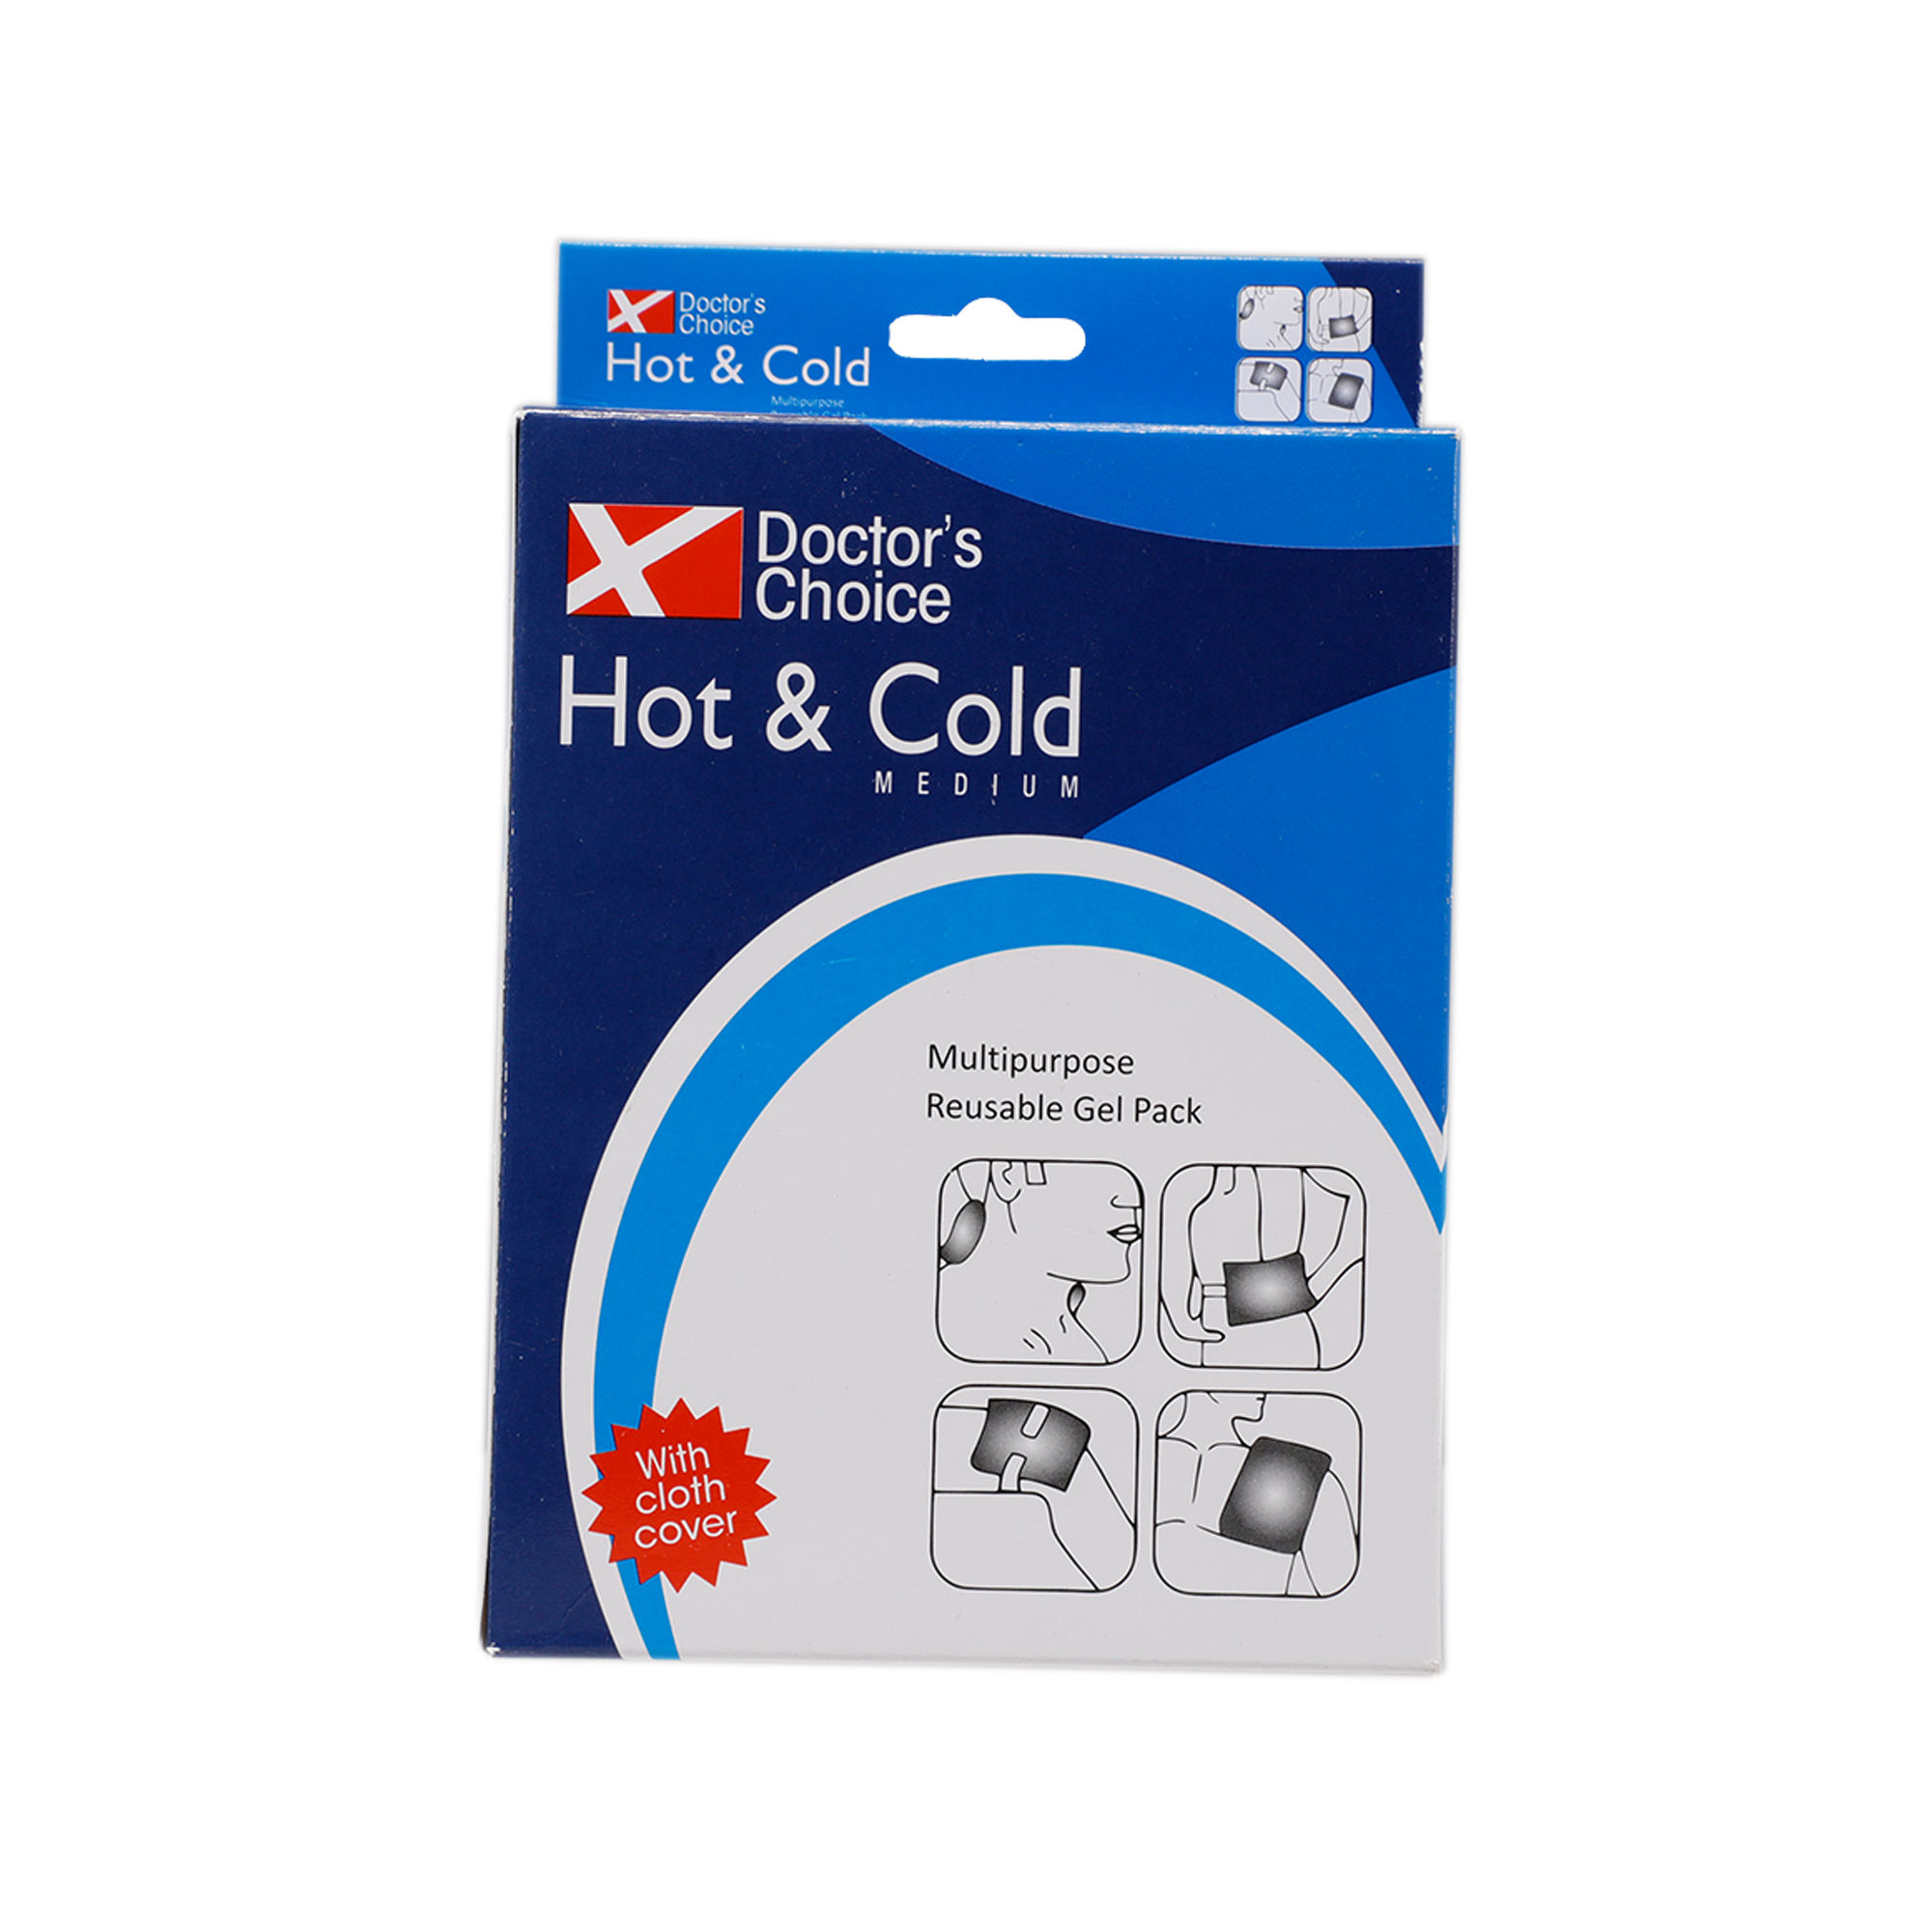 Buy Doctor's Choice Hot & Cold Multi-Purpose Reusable Gel Pack Large, 1 Count Online